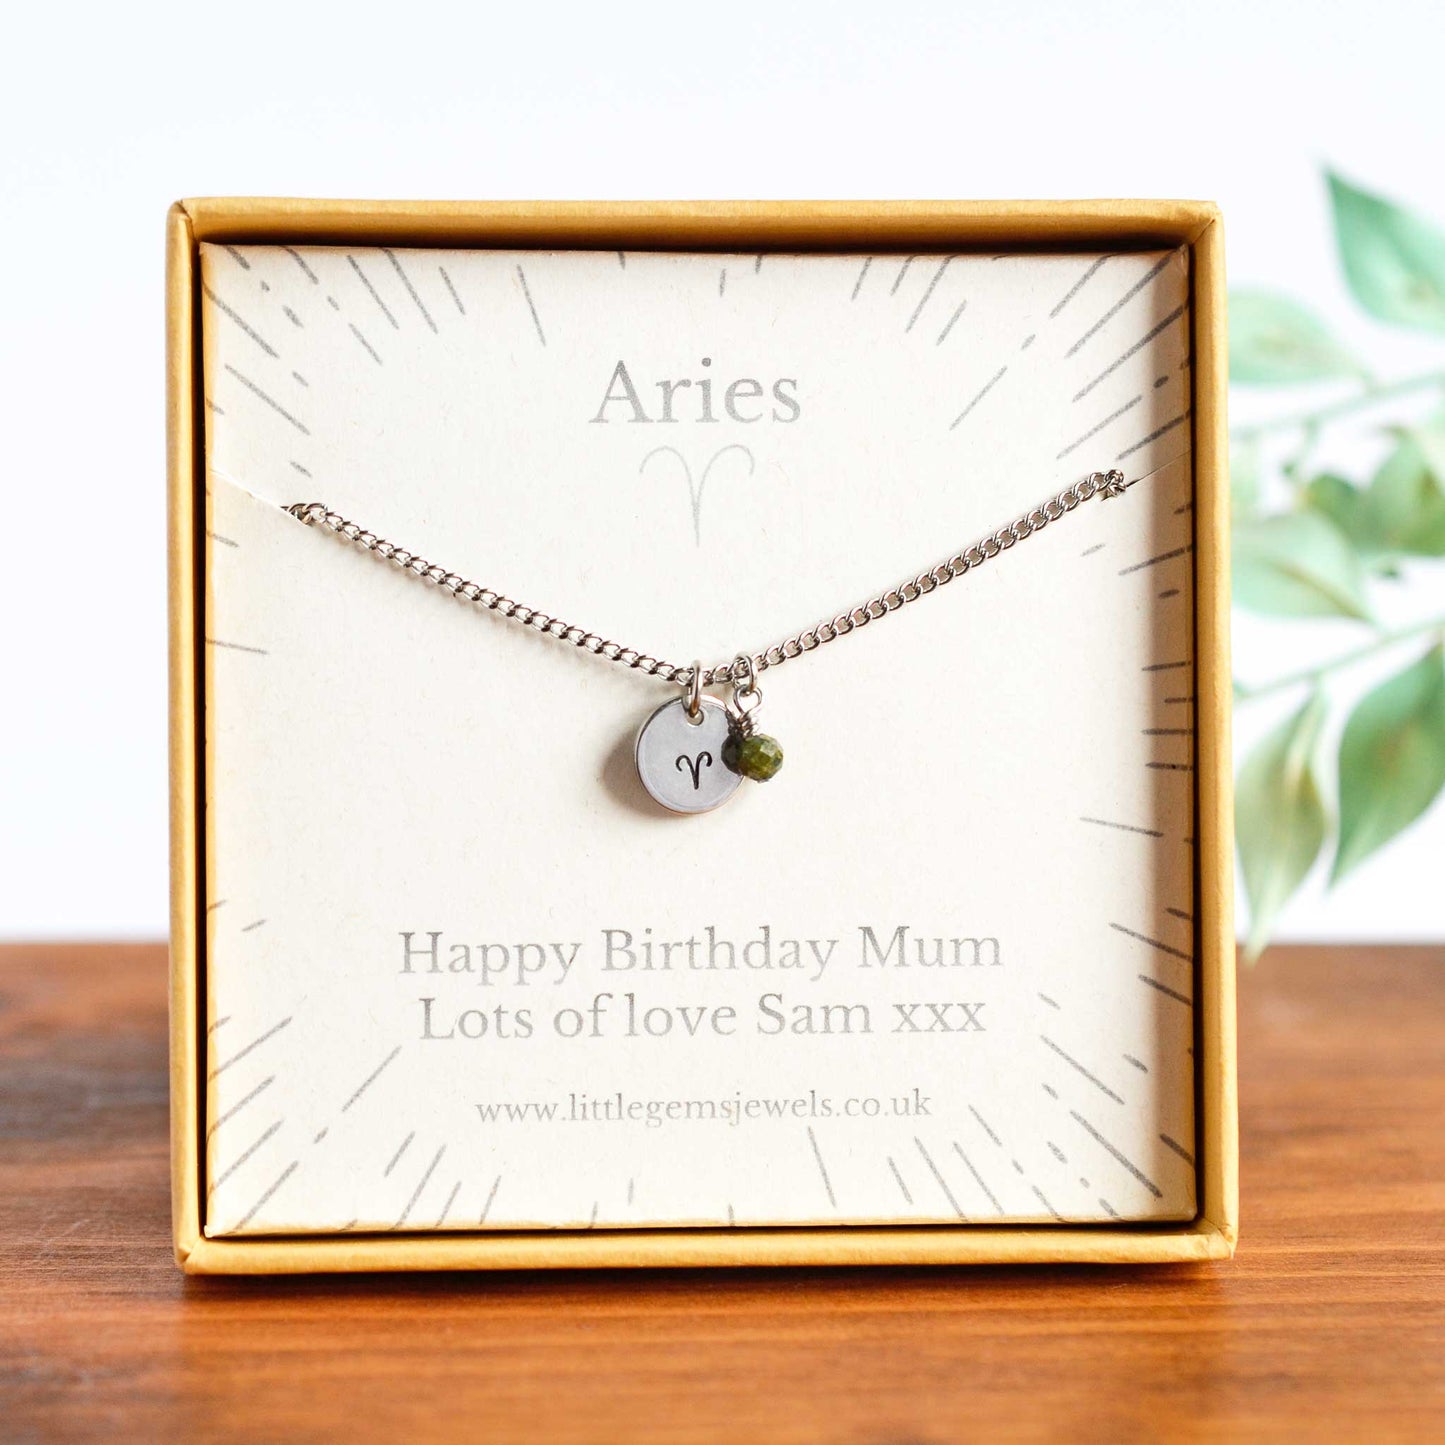 Aries Zodiac necklace with personalised gift message in eco friendly gift box